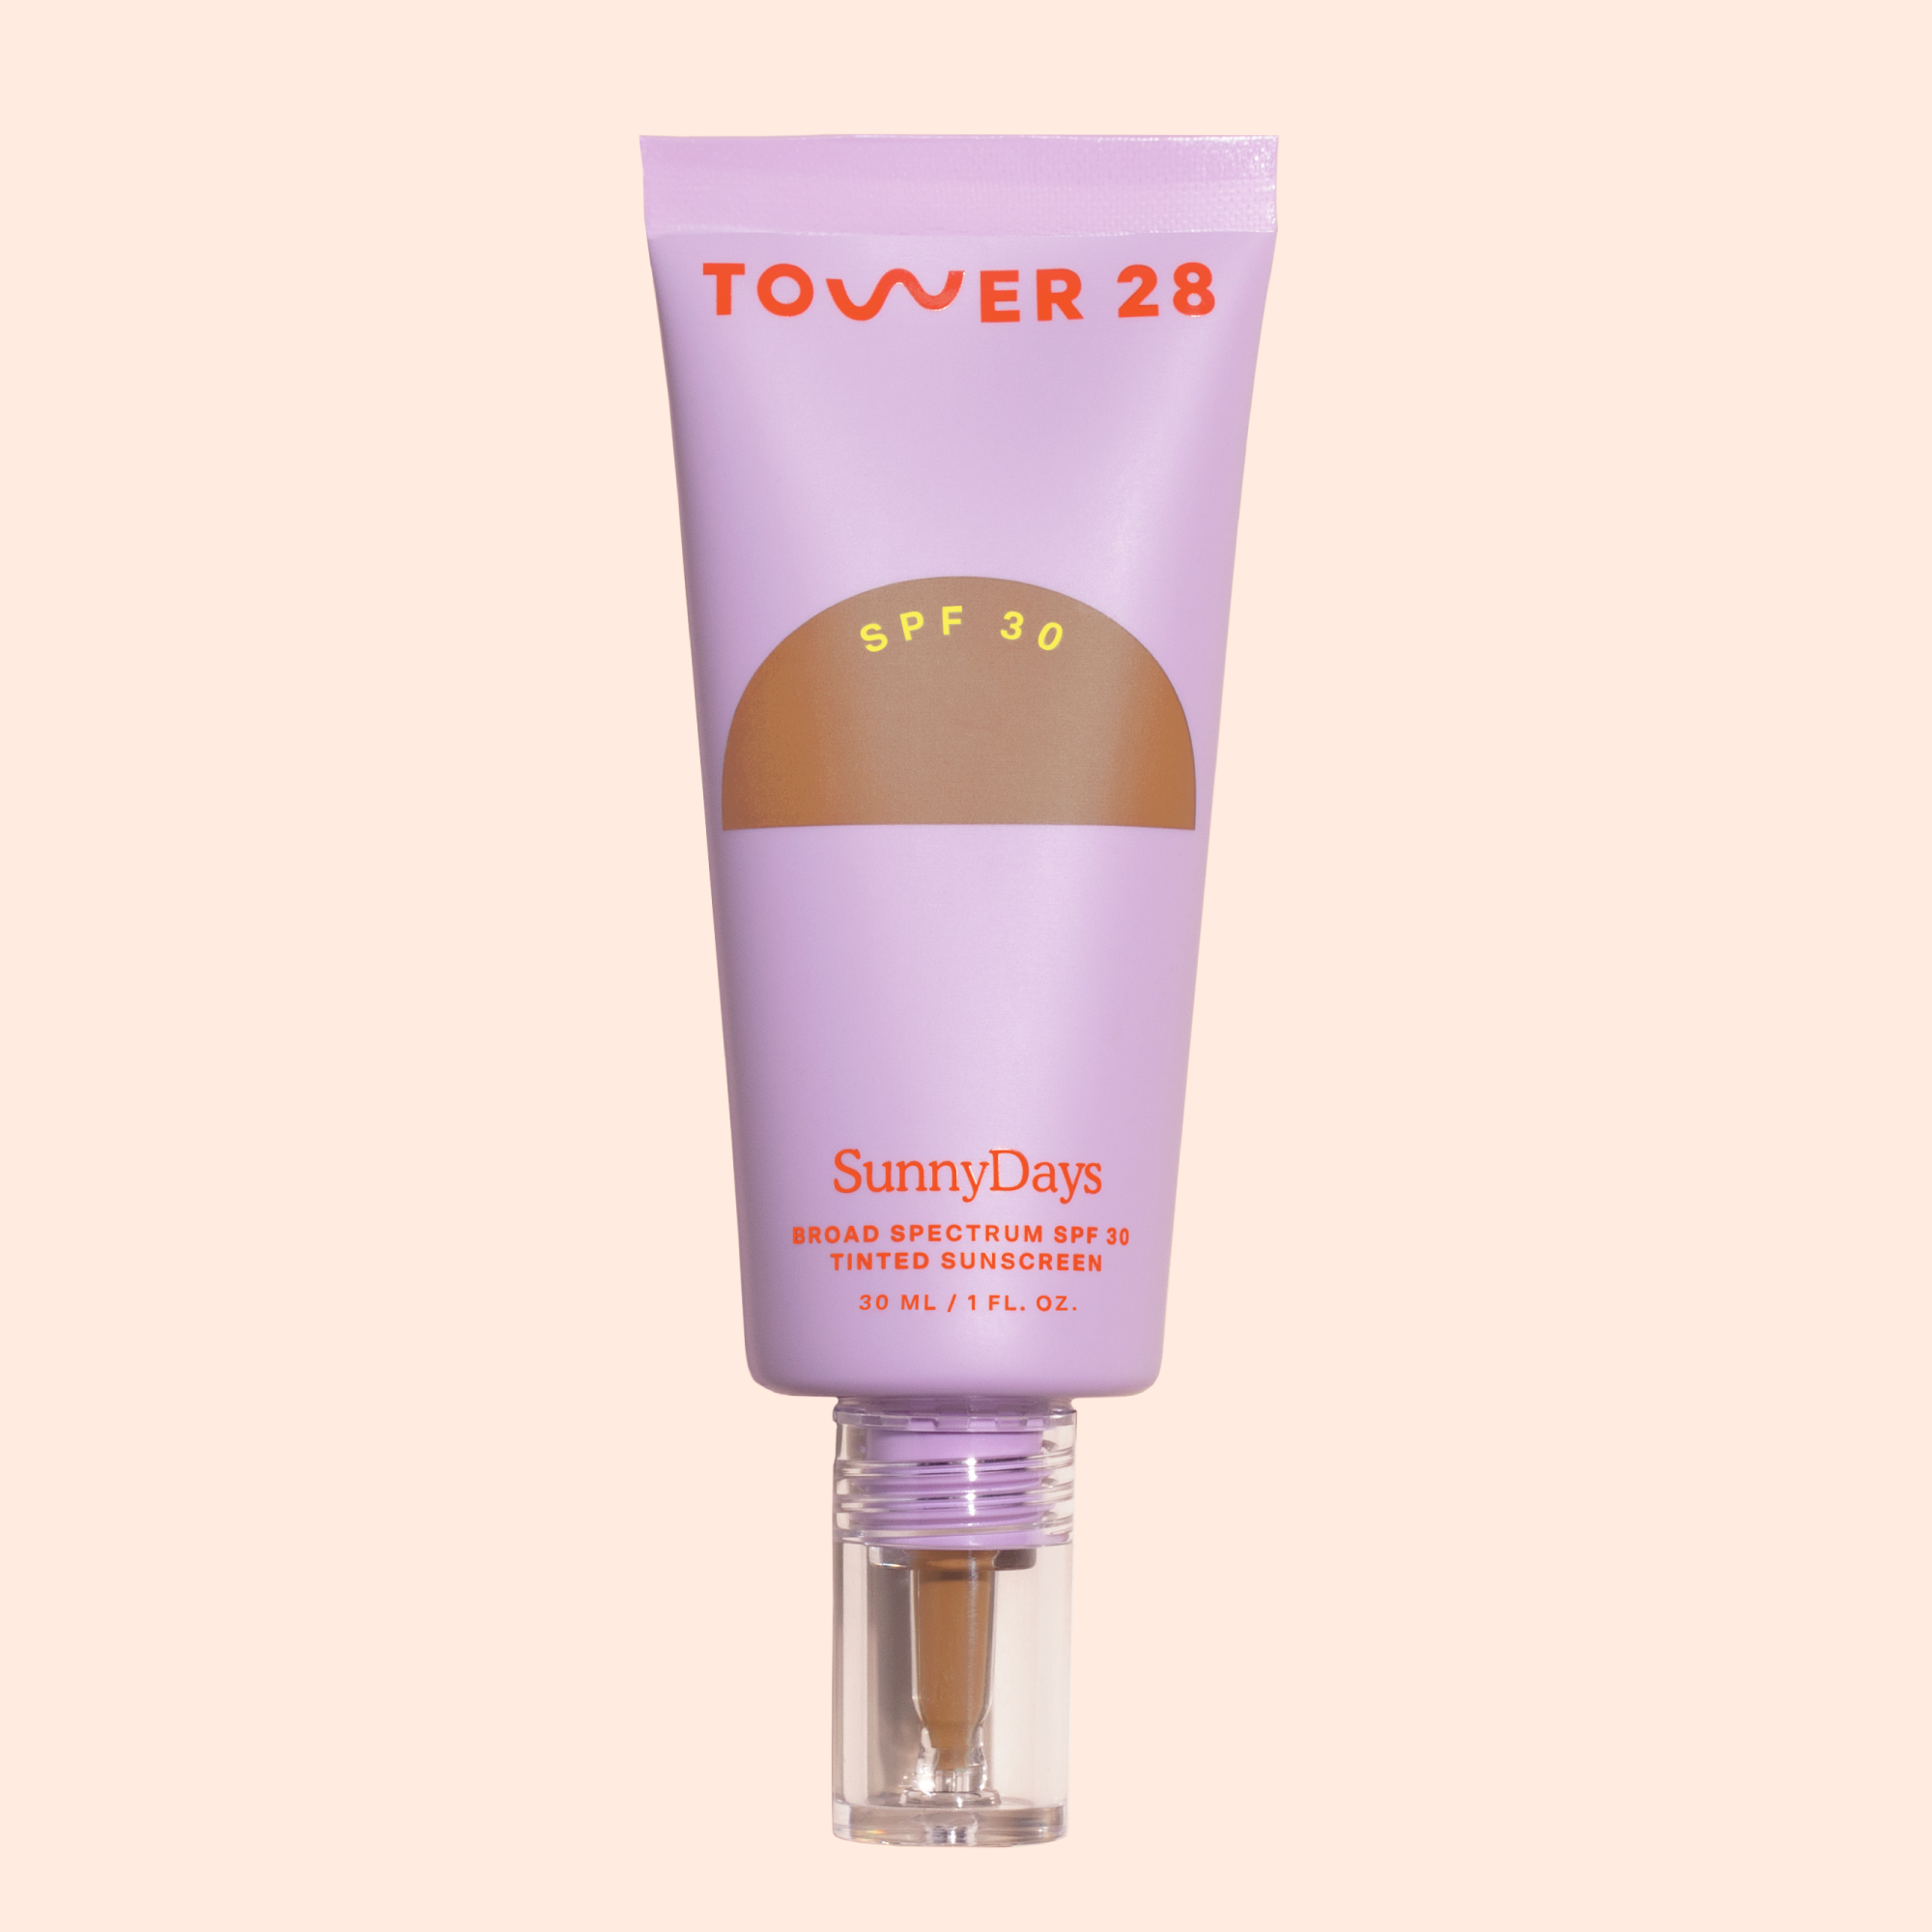 How Amy Liu Is Modernizing the Beauty Industry Through Her Brand, Tower 28